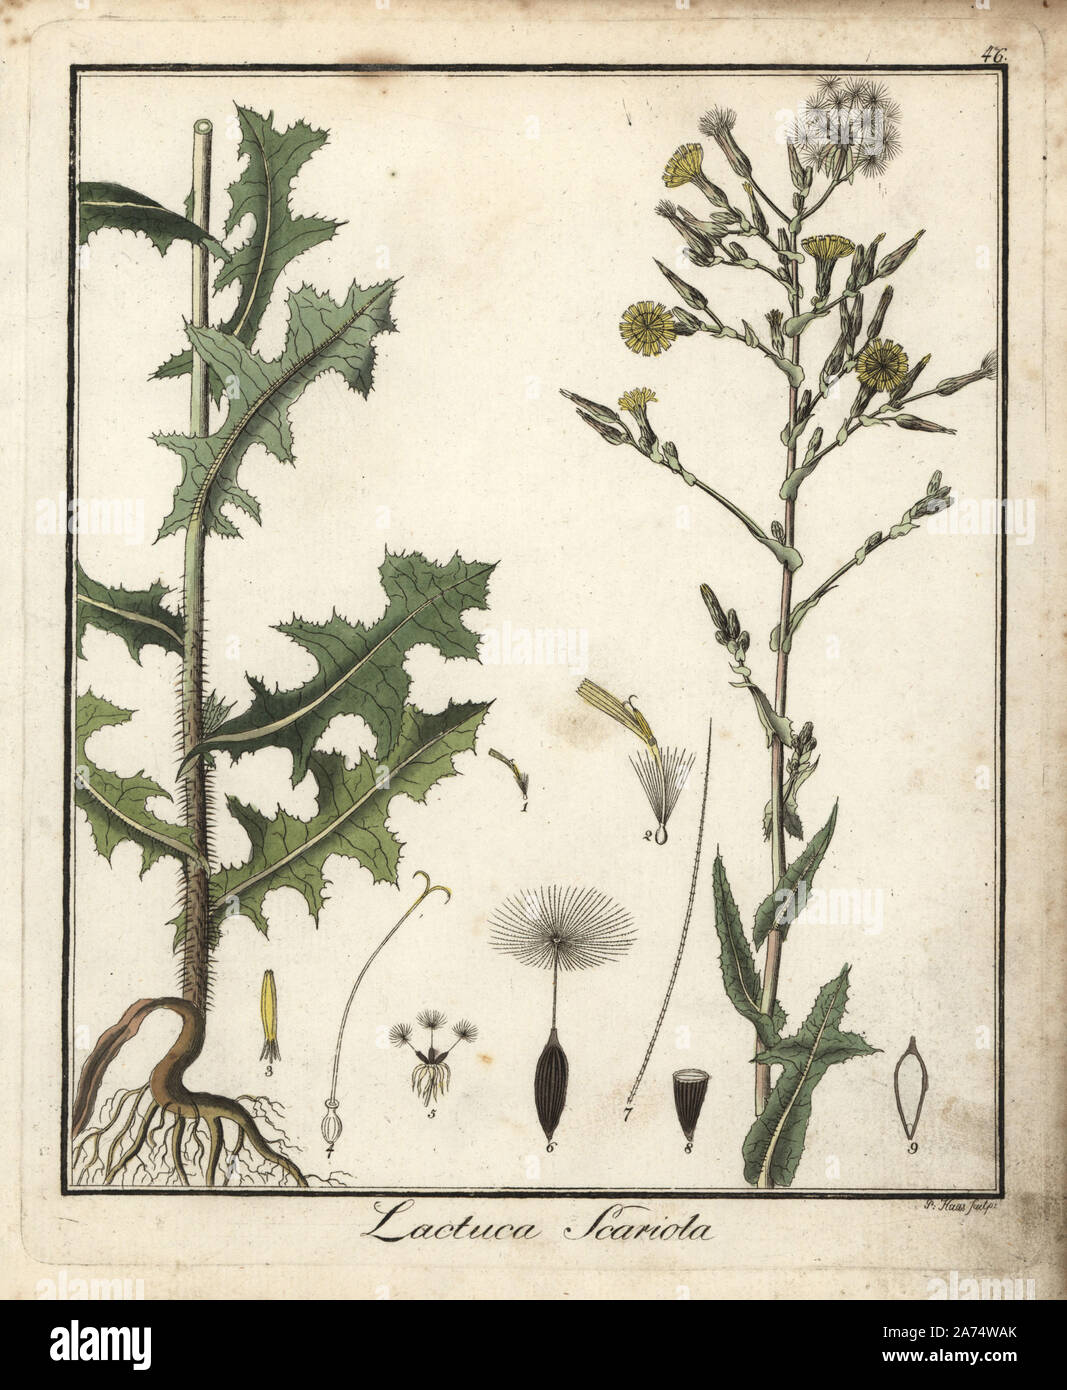 Prickly lettuce, Lactuca serriola. Handcoloured copperplate engraving by P. Haas from Dr. Friedrich Gottlob Hayne's Medical Botany, Berlin, 1822. Hayne (1763-1832) was a German botanist, apothecary and professor of pharmaceutical botany at Berlin University. Stock Photo